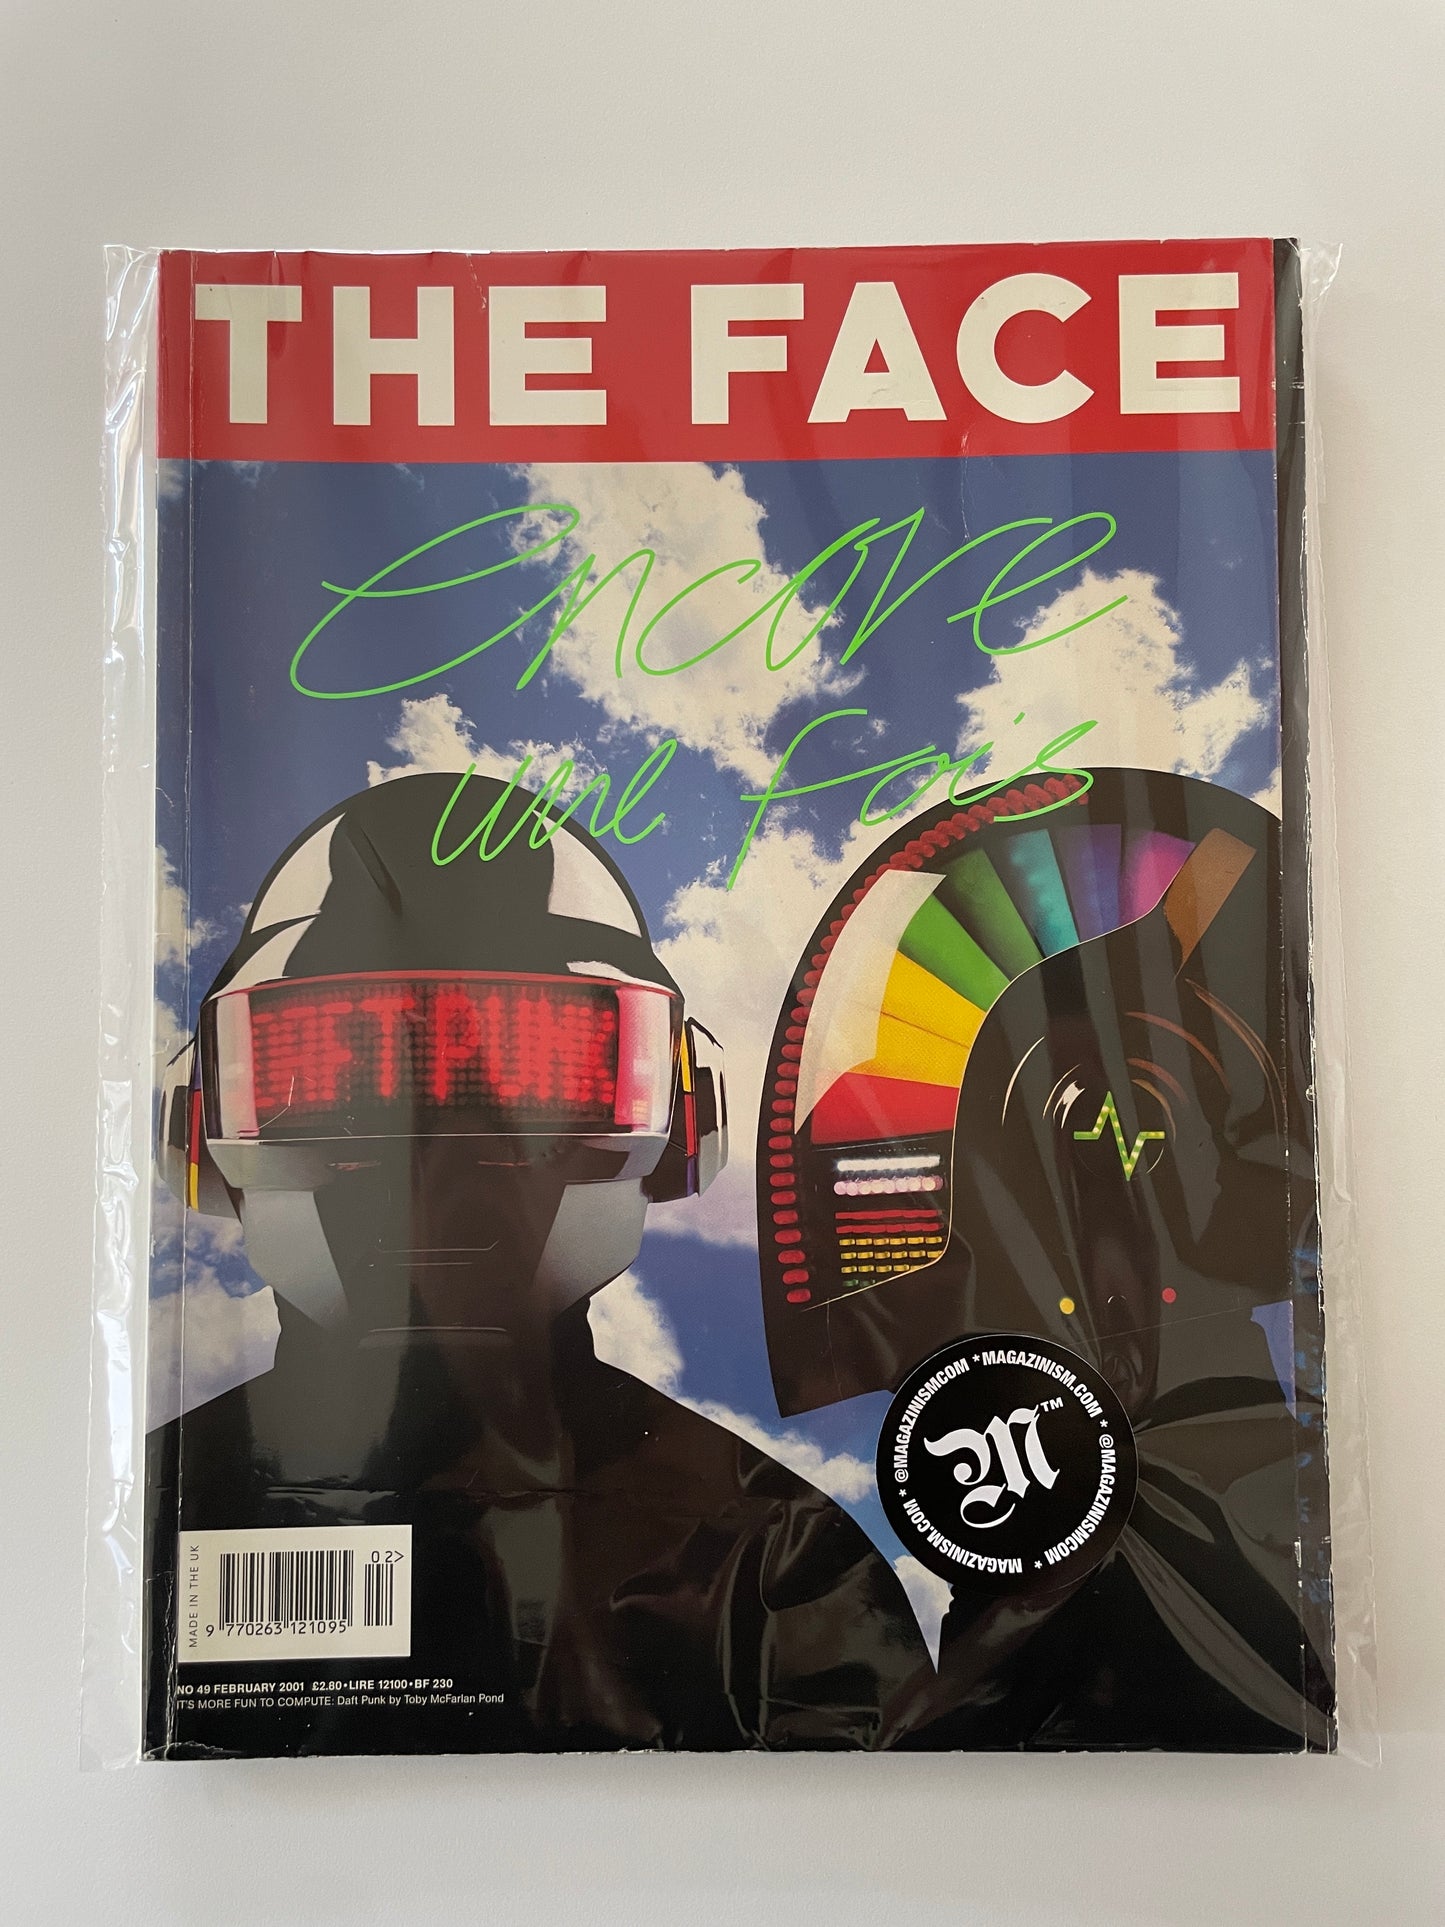 The Face No.49 - February 2001 - Daft Punk